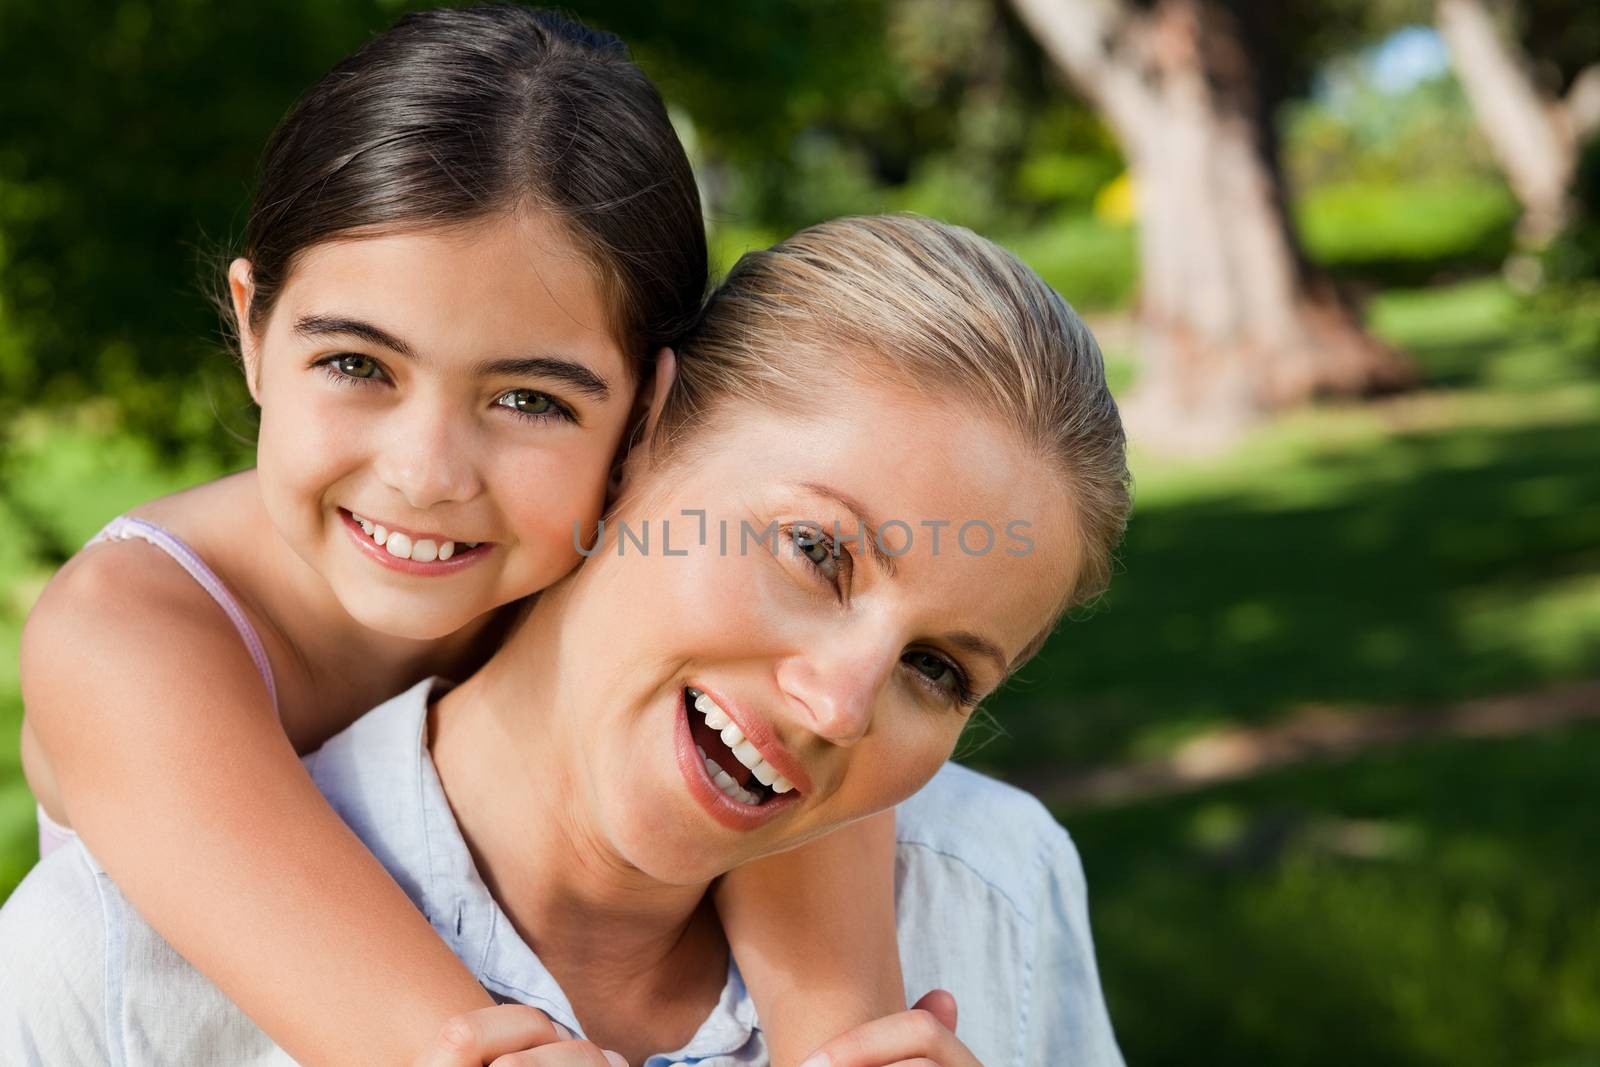 Cute daughter with her mother in the park during the summer